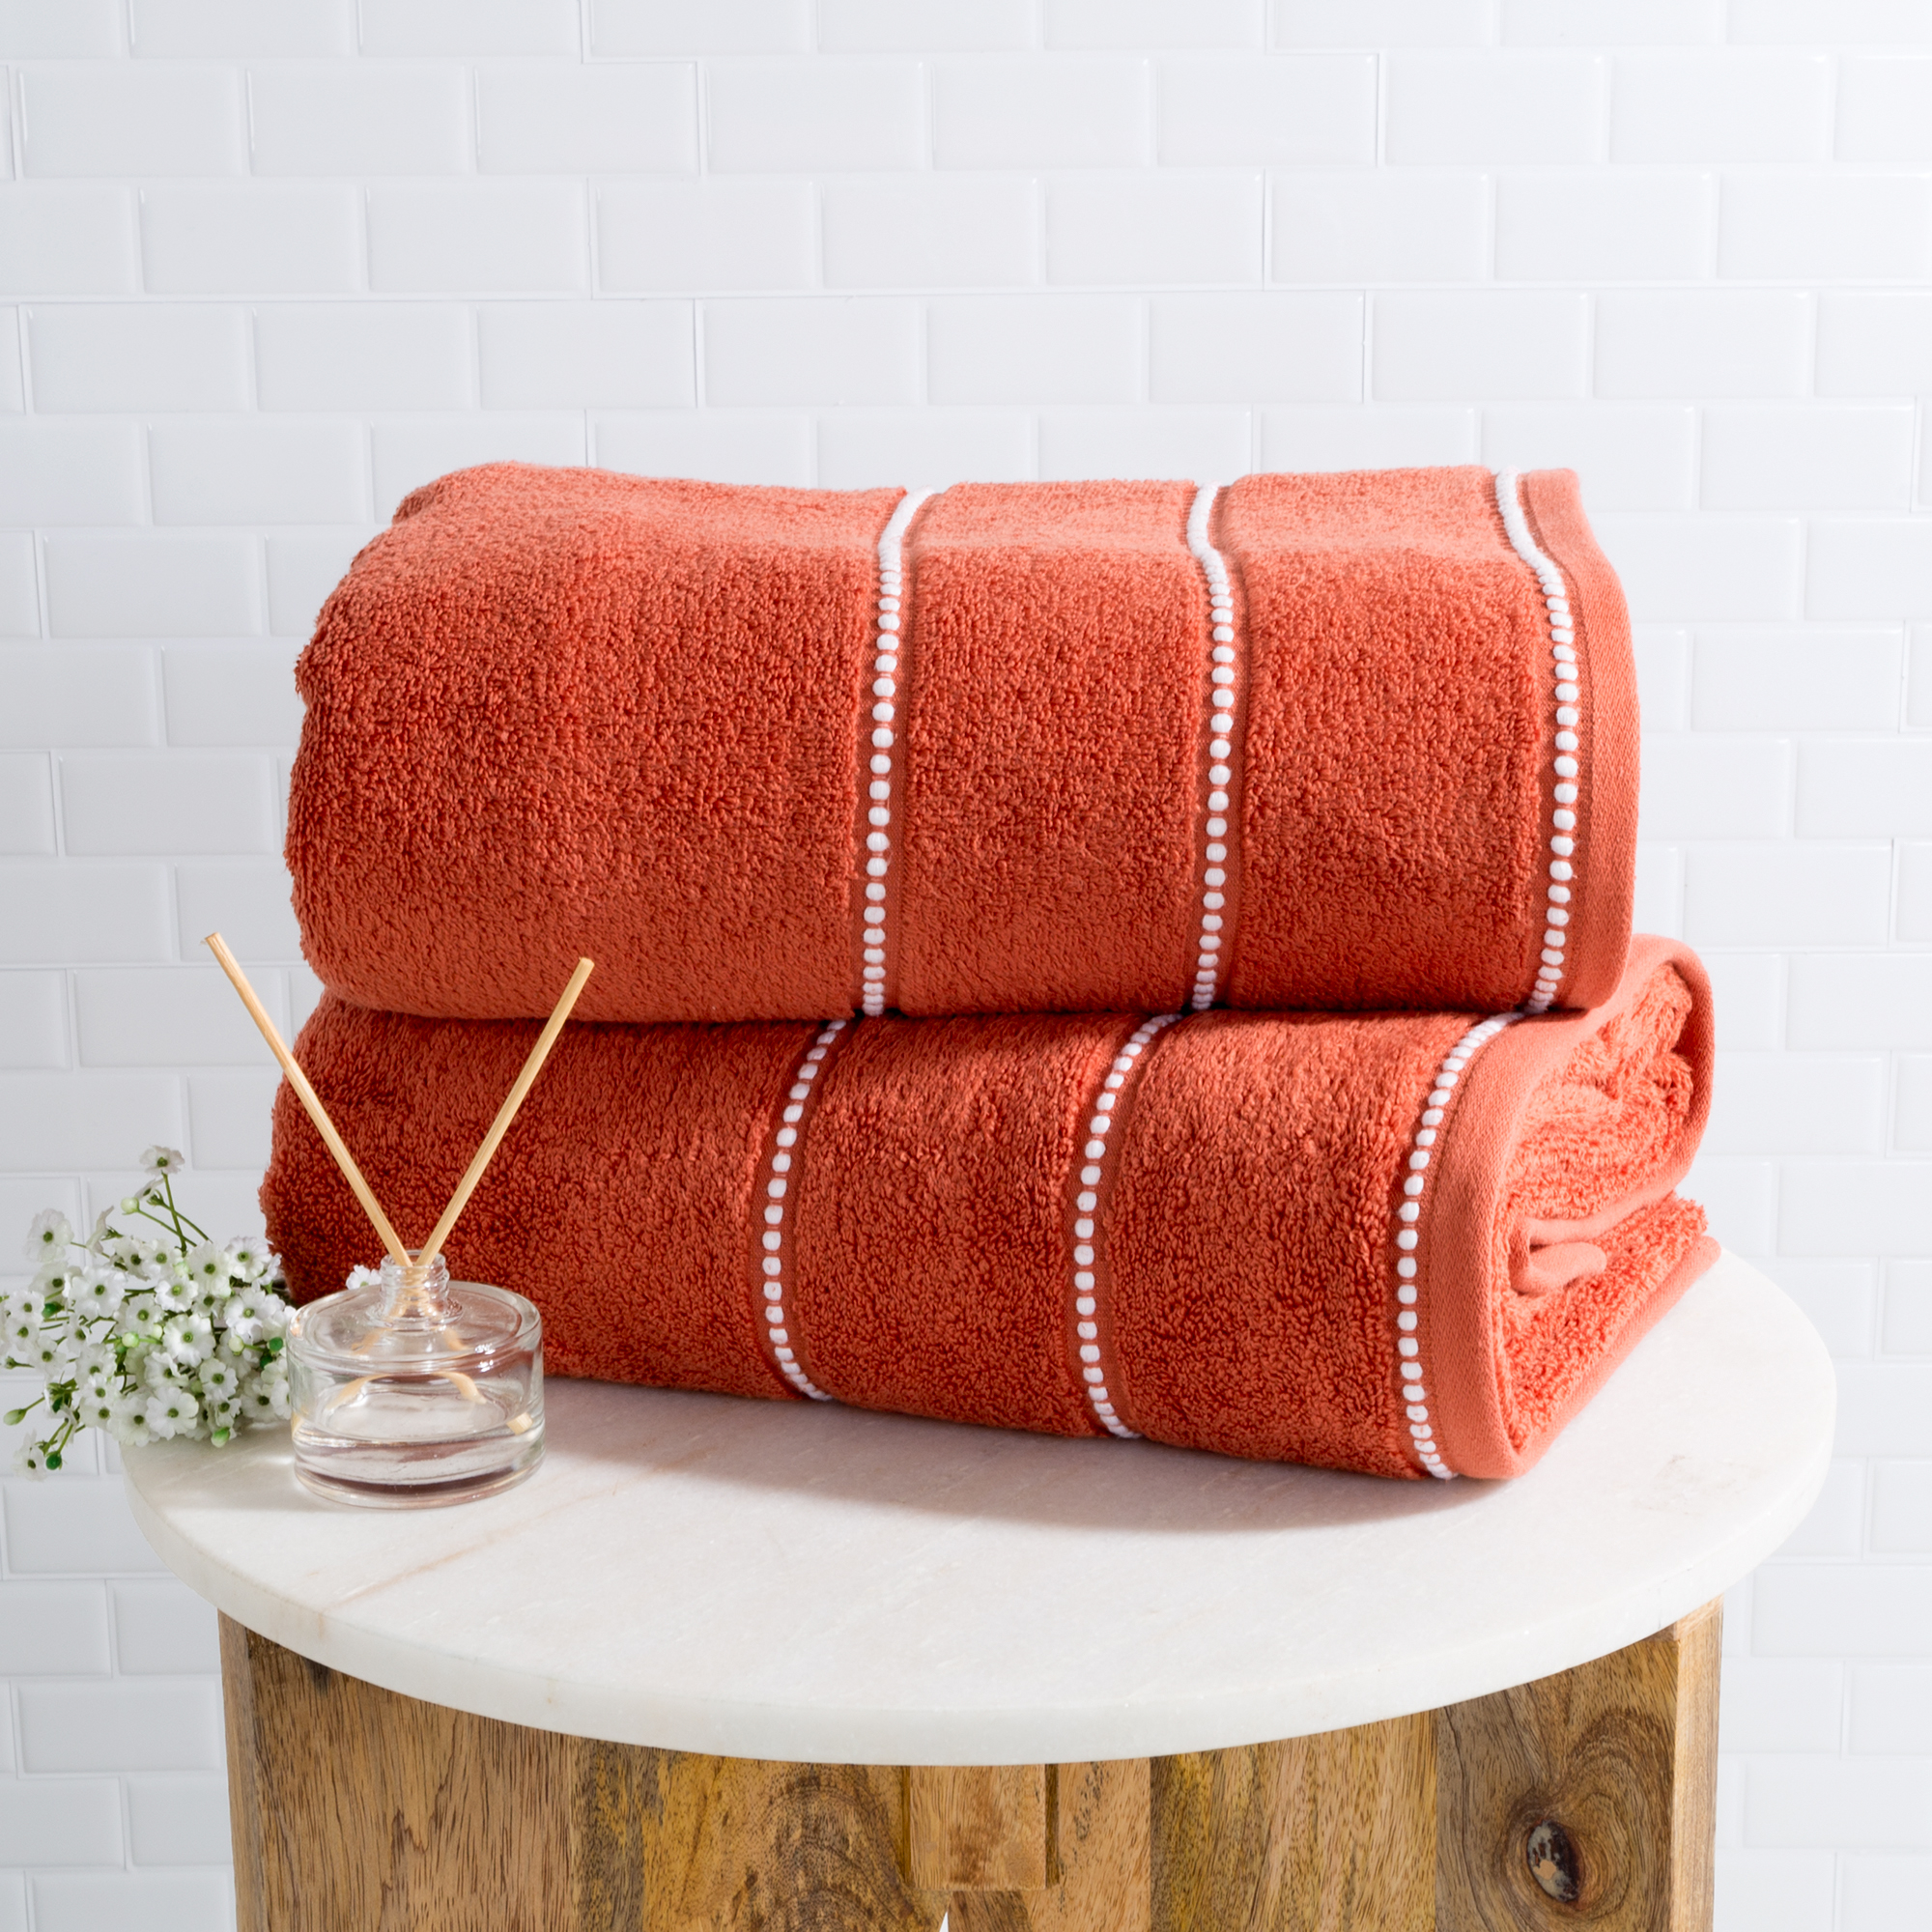 Luxurious Huge 34 X 68 In Cotton Towel Set- 2 Piece Bath Sheet Set Made From 100% Plush Cotton- Quick Dry, Soft And Absorbent Brick